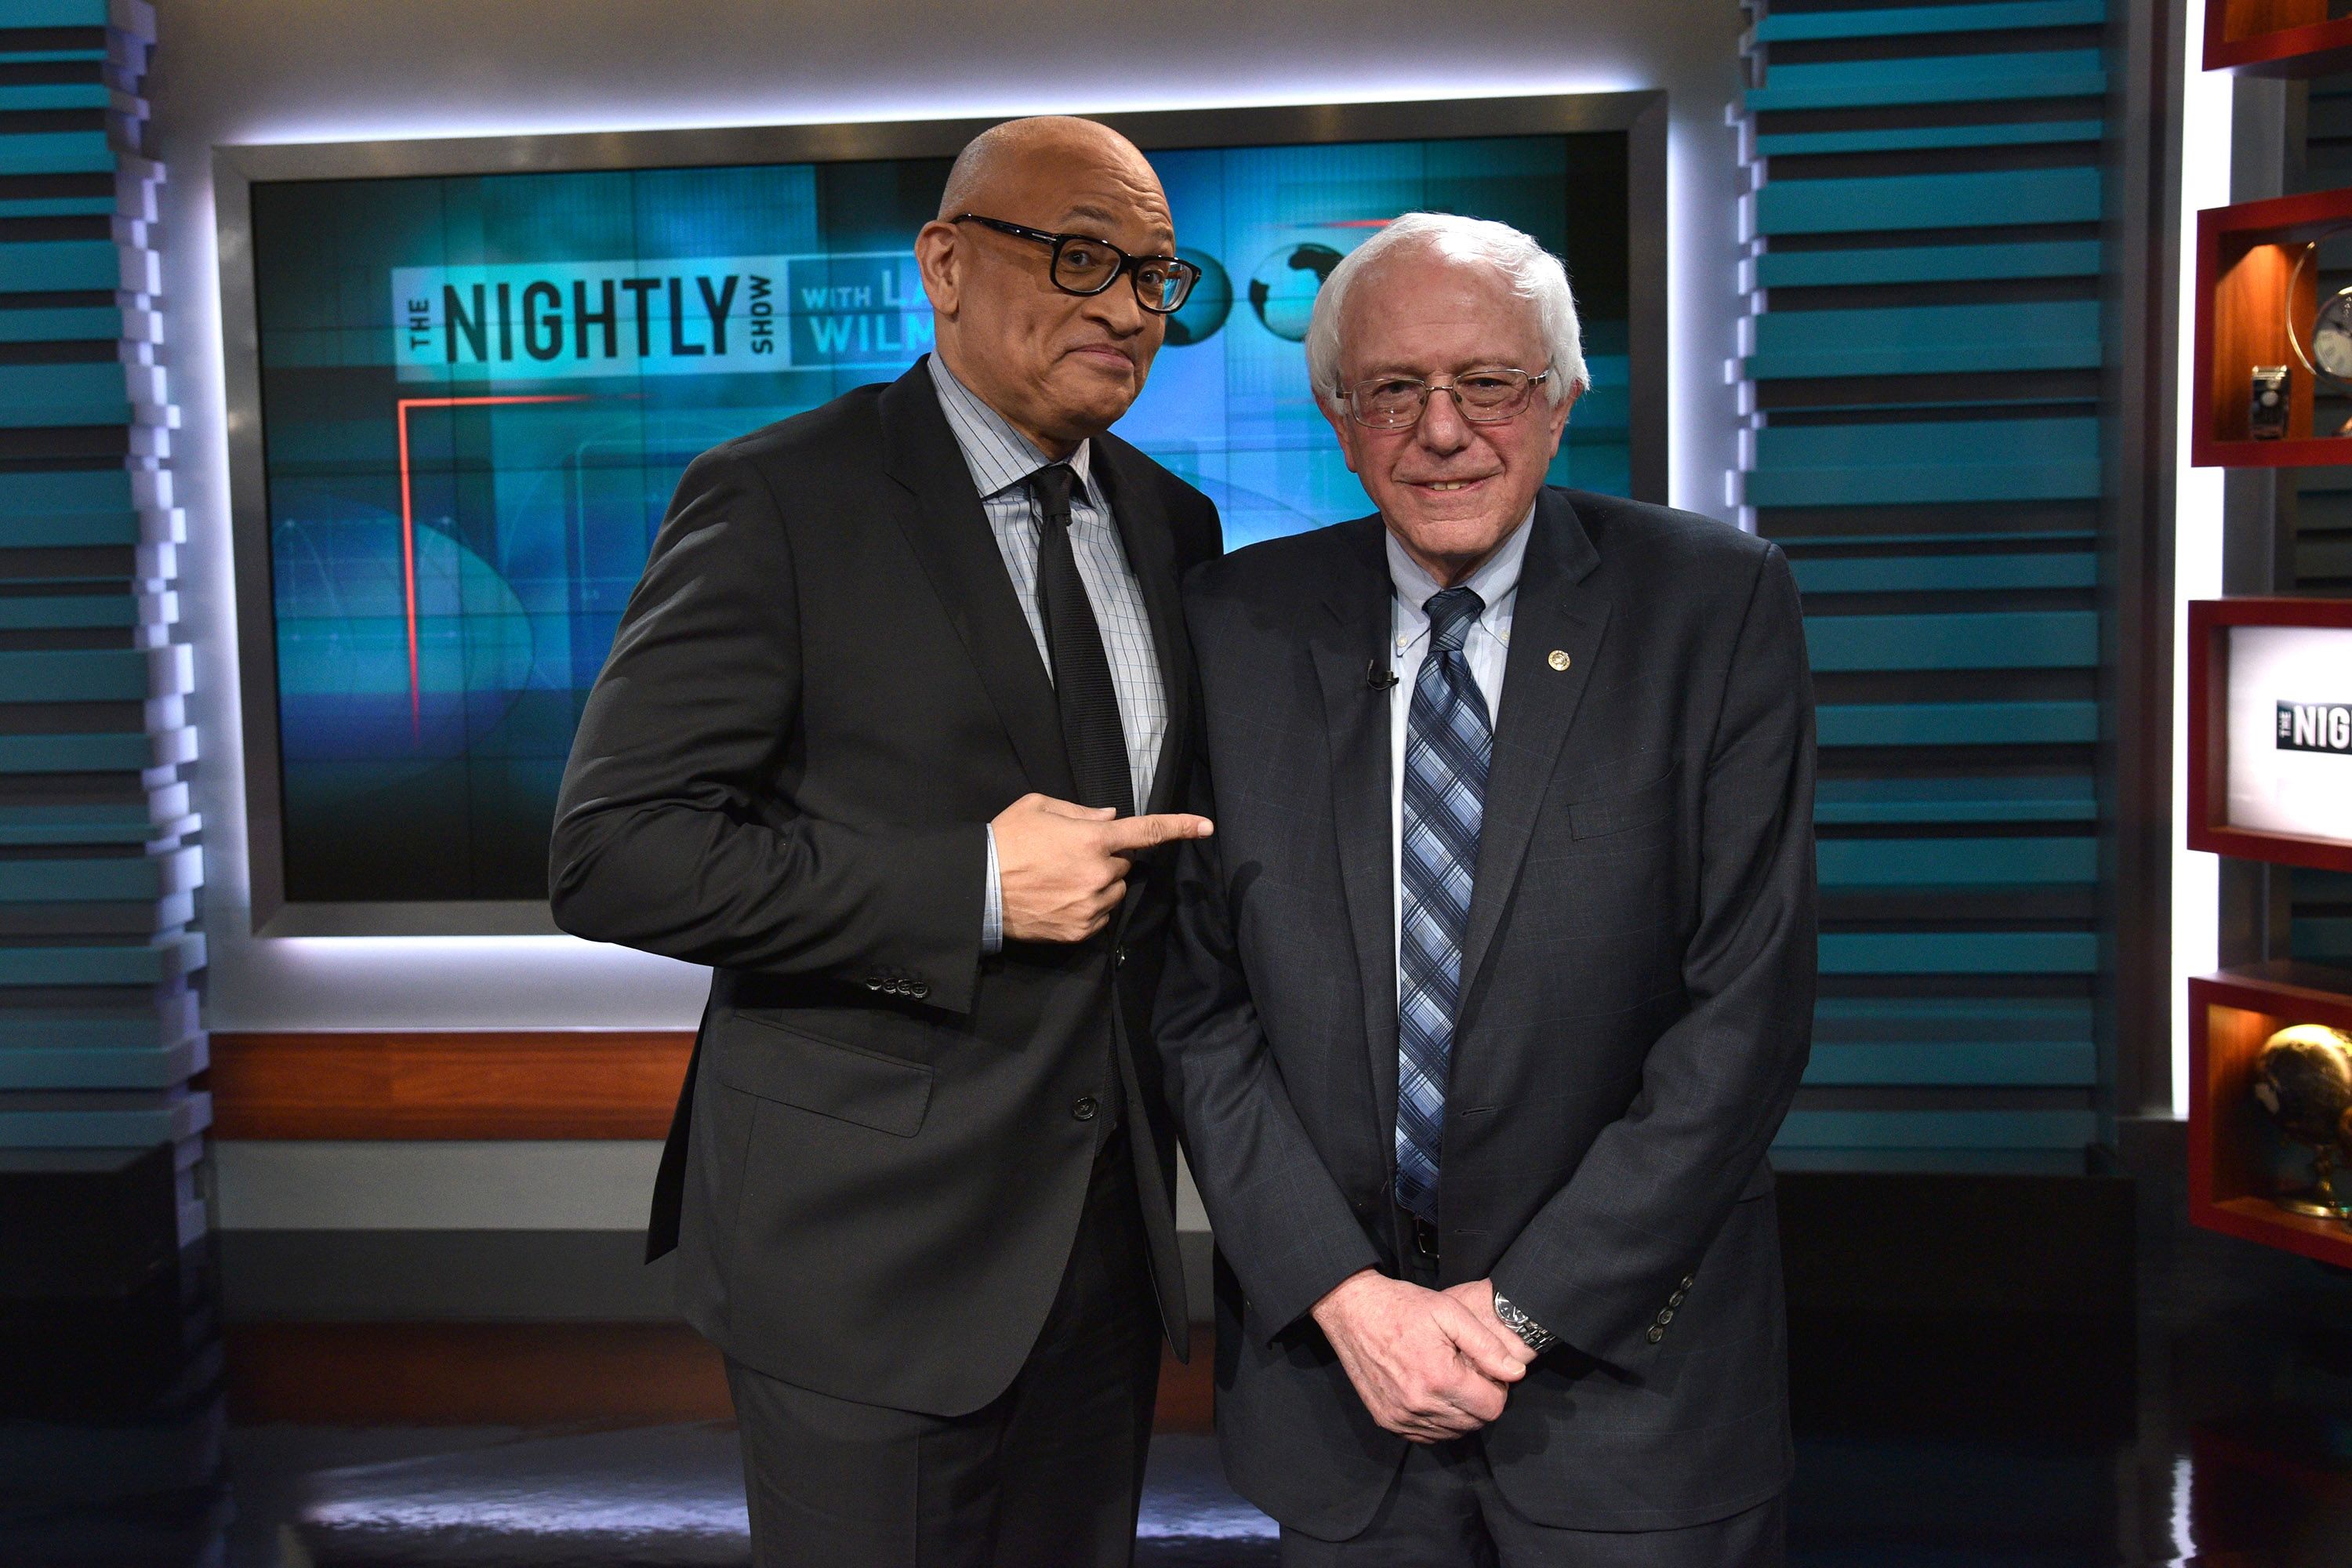 NEW YORK, NY - JANUARY 05: Host Larry Wilmore and Senator Bernie Sanders attend Comedy Central's "The Nightly Show With Larry Wilmore" on January 5, 2016 in New York City. (Photo by Bryan Bedder/Getty Images for Comedy Central)